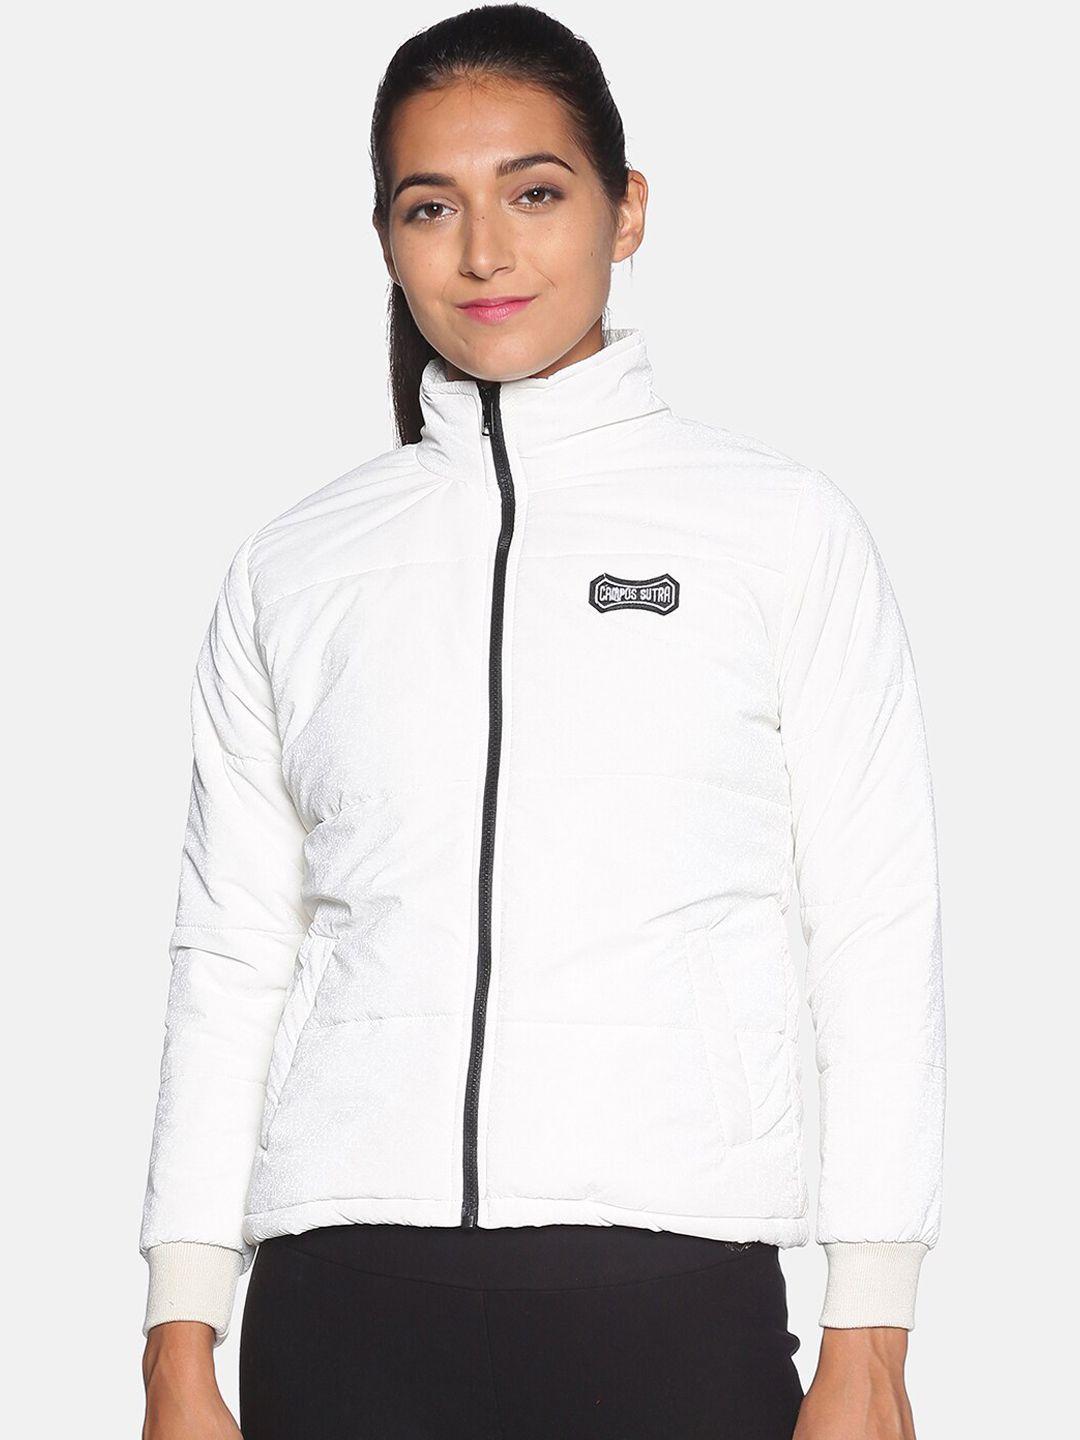 campus-sutra-women-white-solid-windcheater-padded-jacket